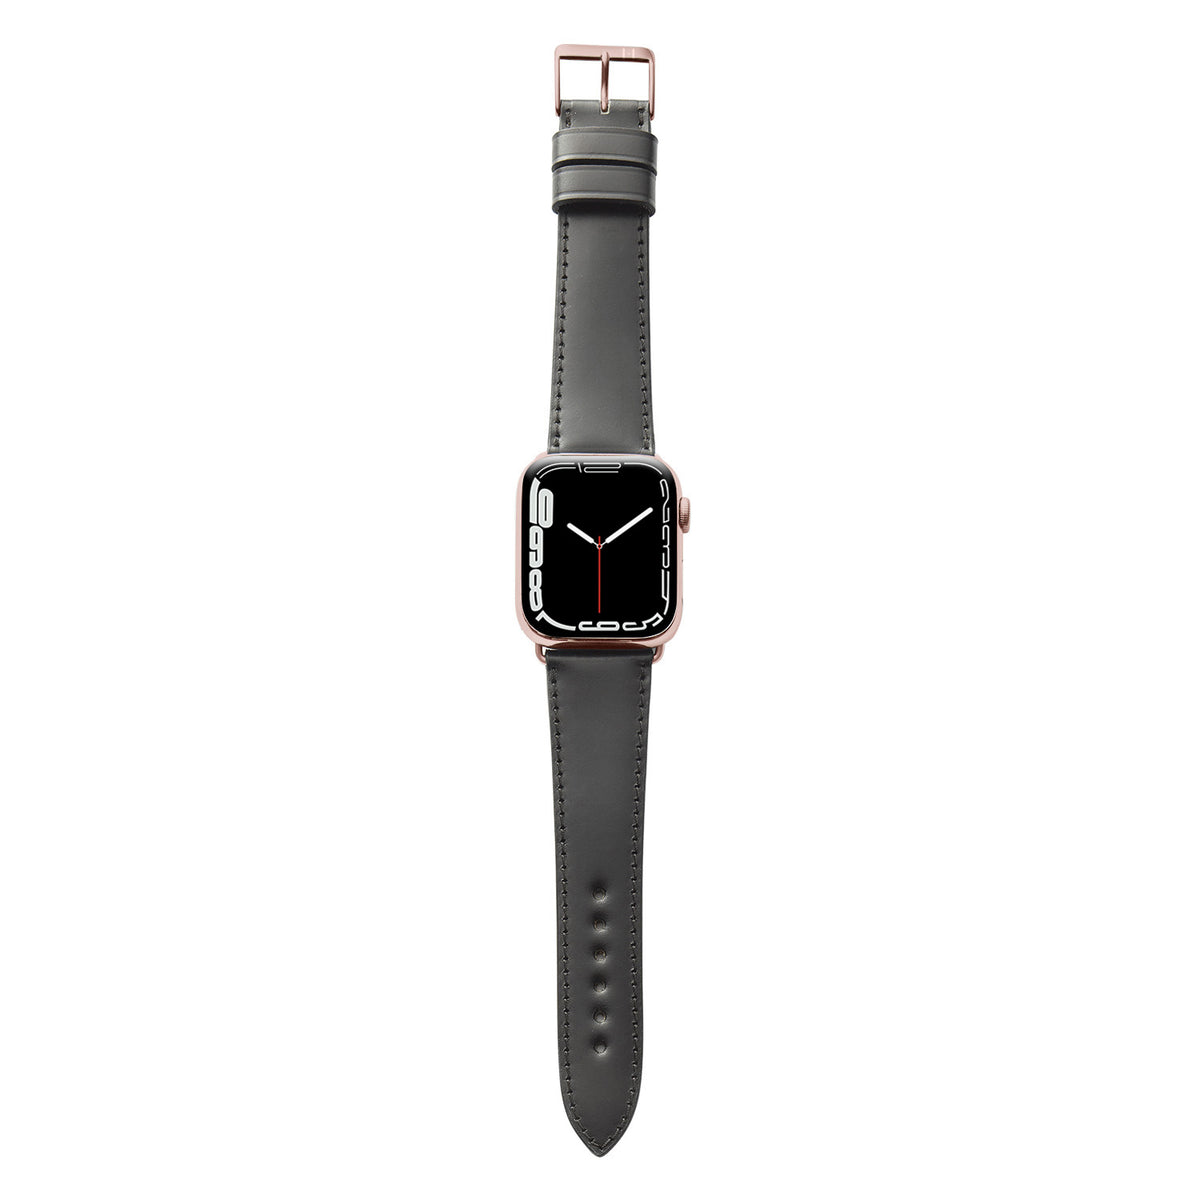 Apple Watch leather strap made of shell cordovan &quot;WINTERHUDE&quot; - black